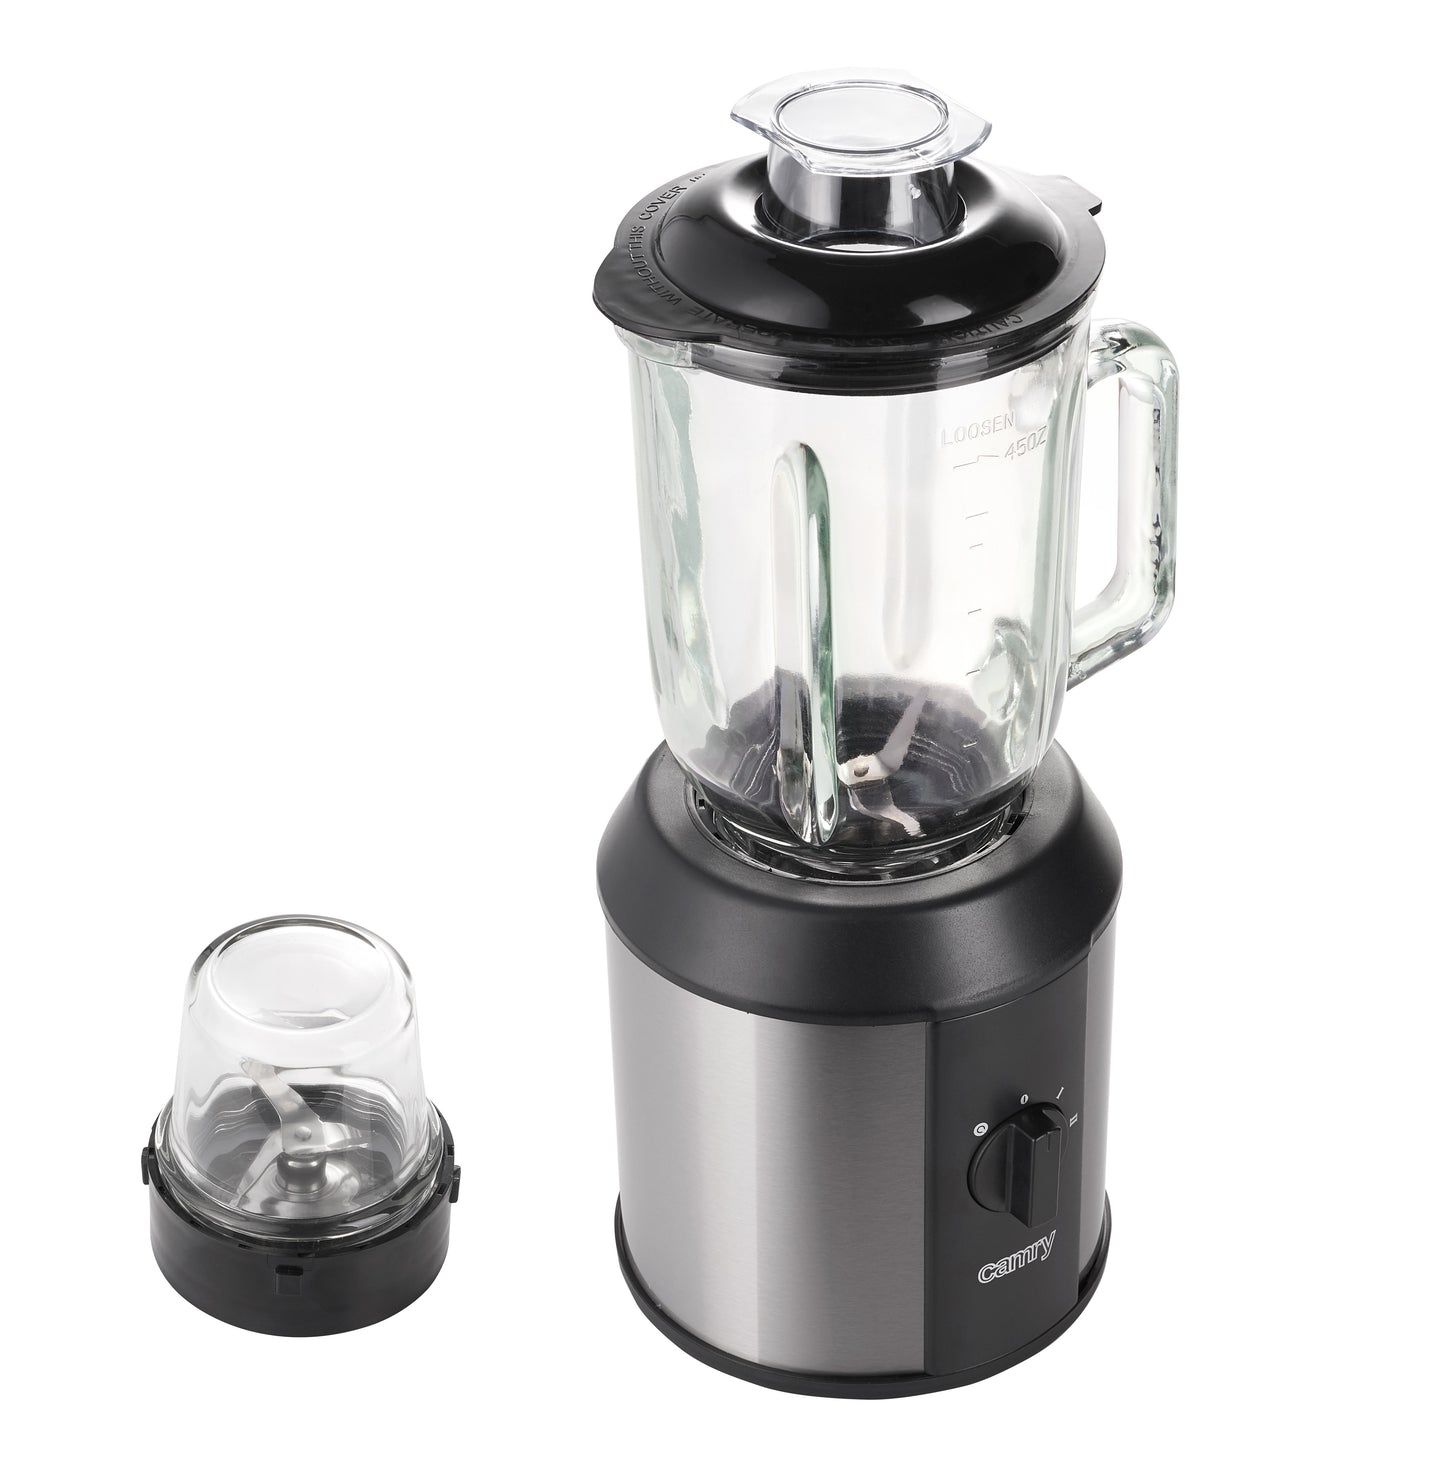 Camry CR4058 Blender with Grinding Attachment and Crush Ice Function 1500W